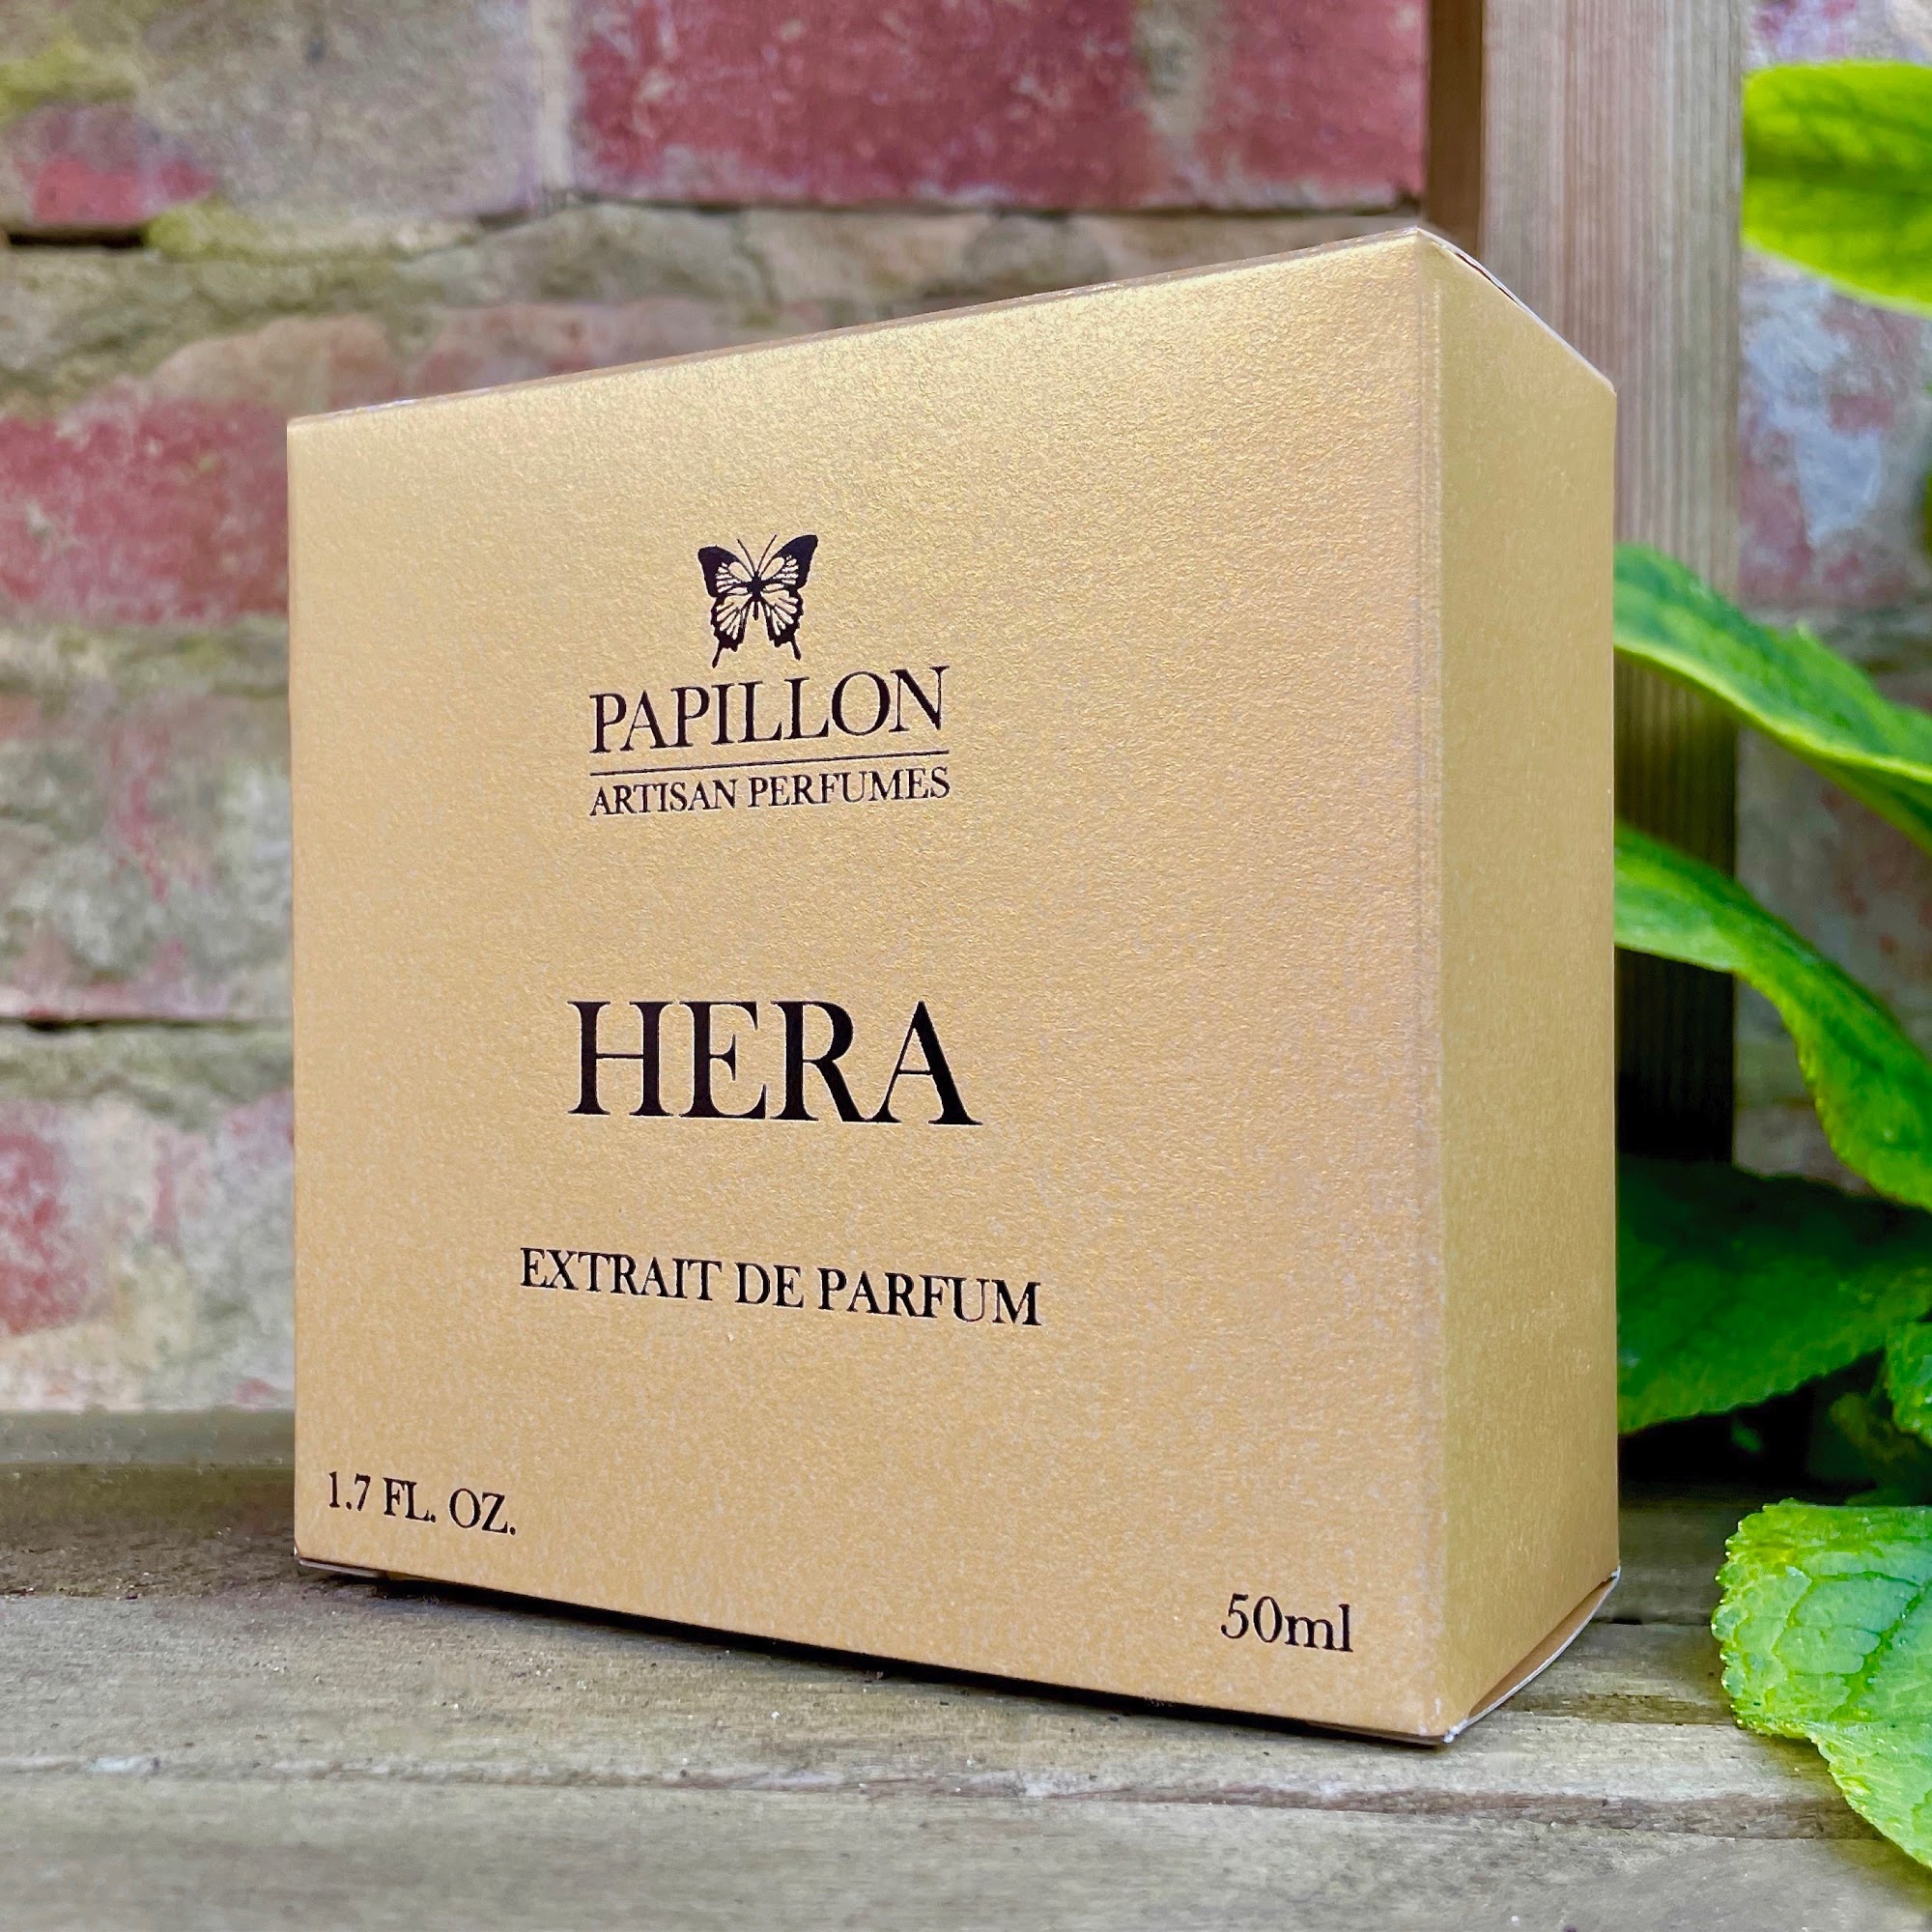 The box for the perfume HERA, created by Liz Moores for Papillon Perfumery